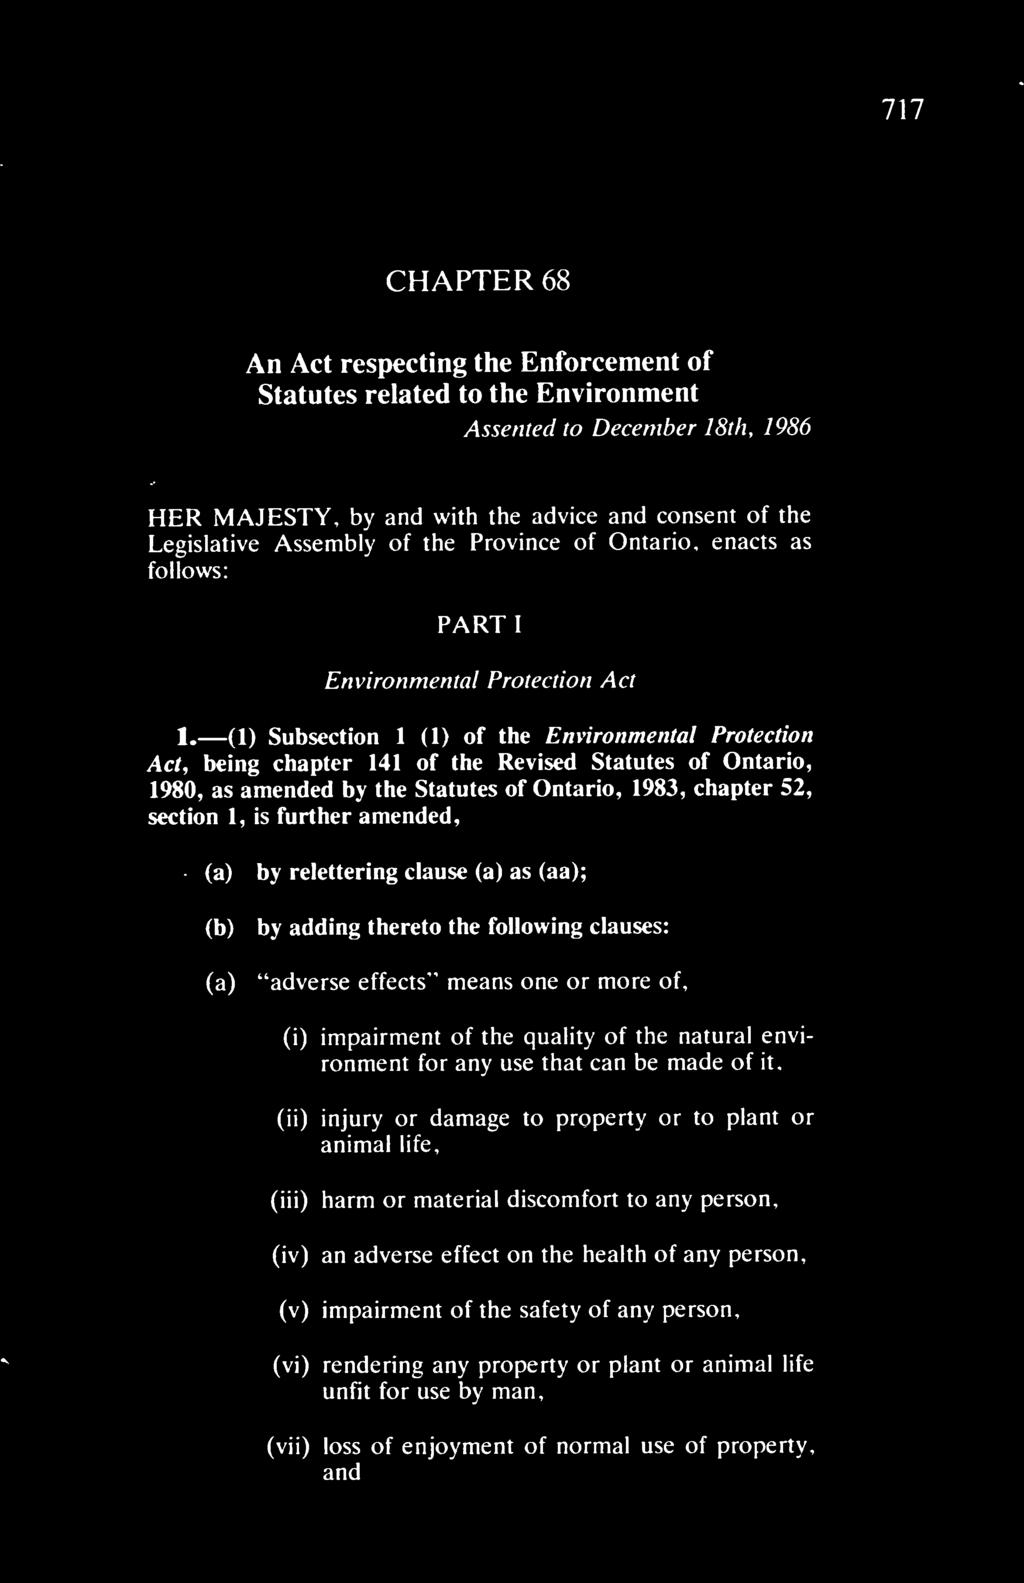 717 CHAPTER 68 An Act respecting the Enforcement of Statutes related to the Environment Assented to December 18th, 1986 HER MAJESTY, by and with the advice and consent of the Legislative Assembly of